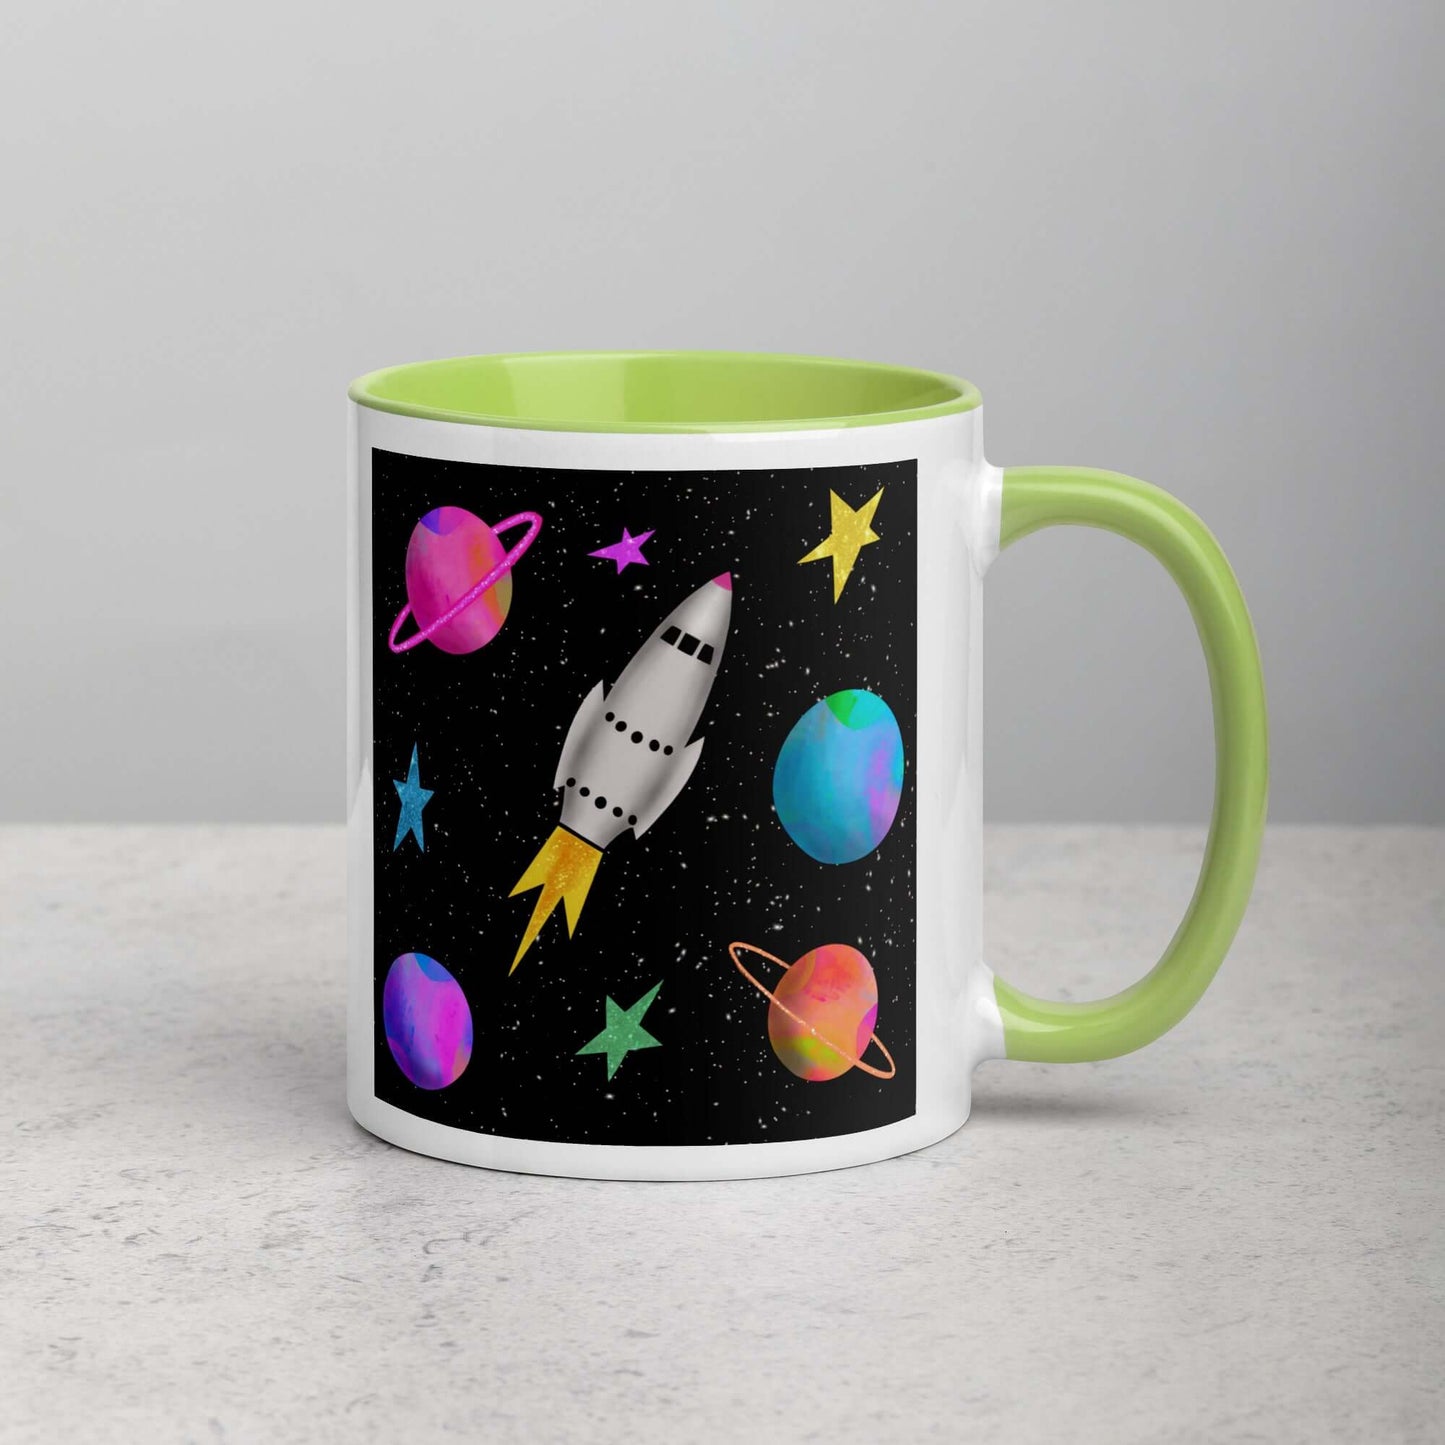 Whimsical Space Rocket with Colorful Planets and Stars on Black Background “Space Rockets” Mug with Lime Green Color Inside Right Handed Front View